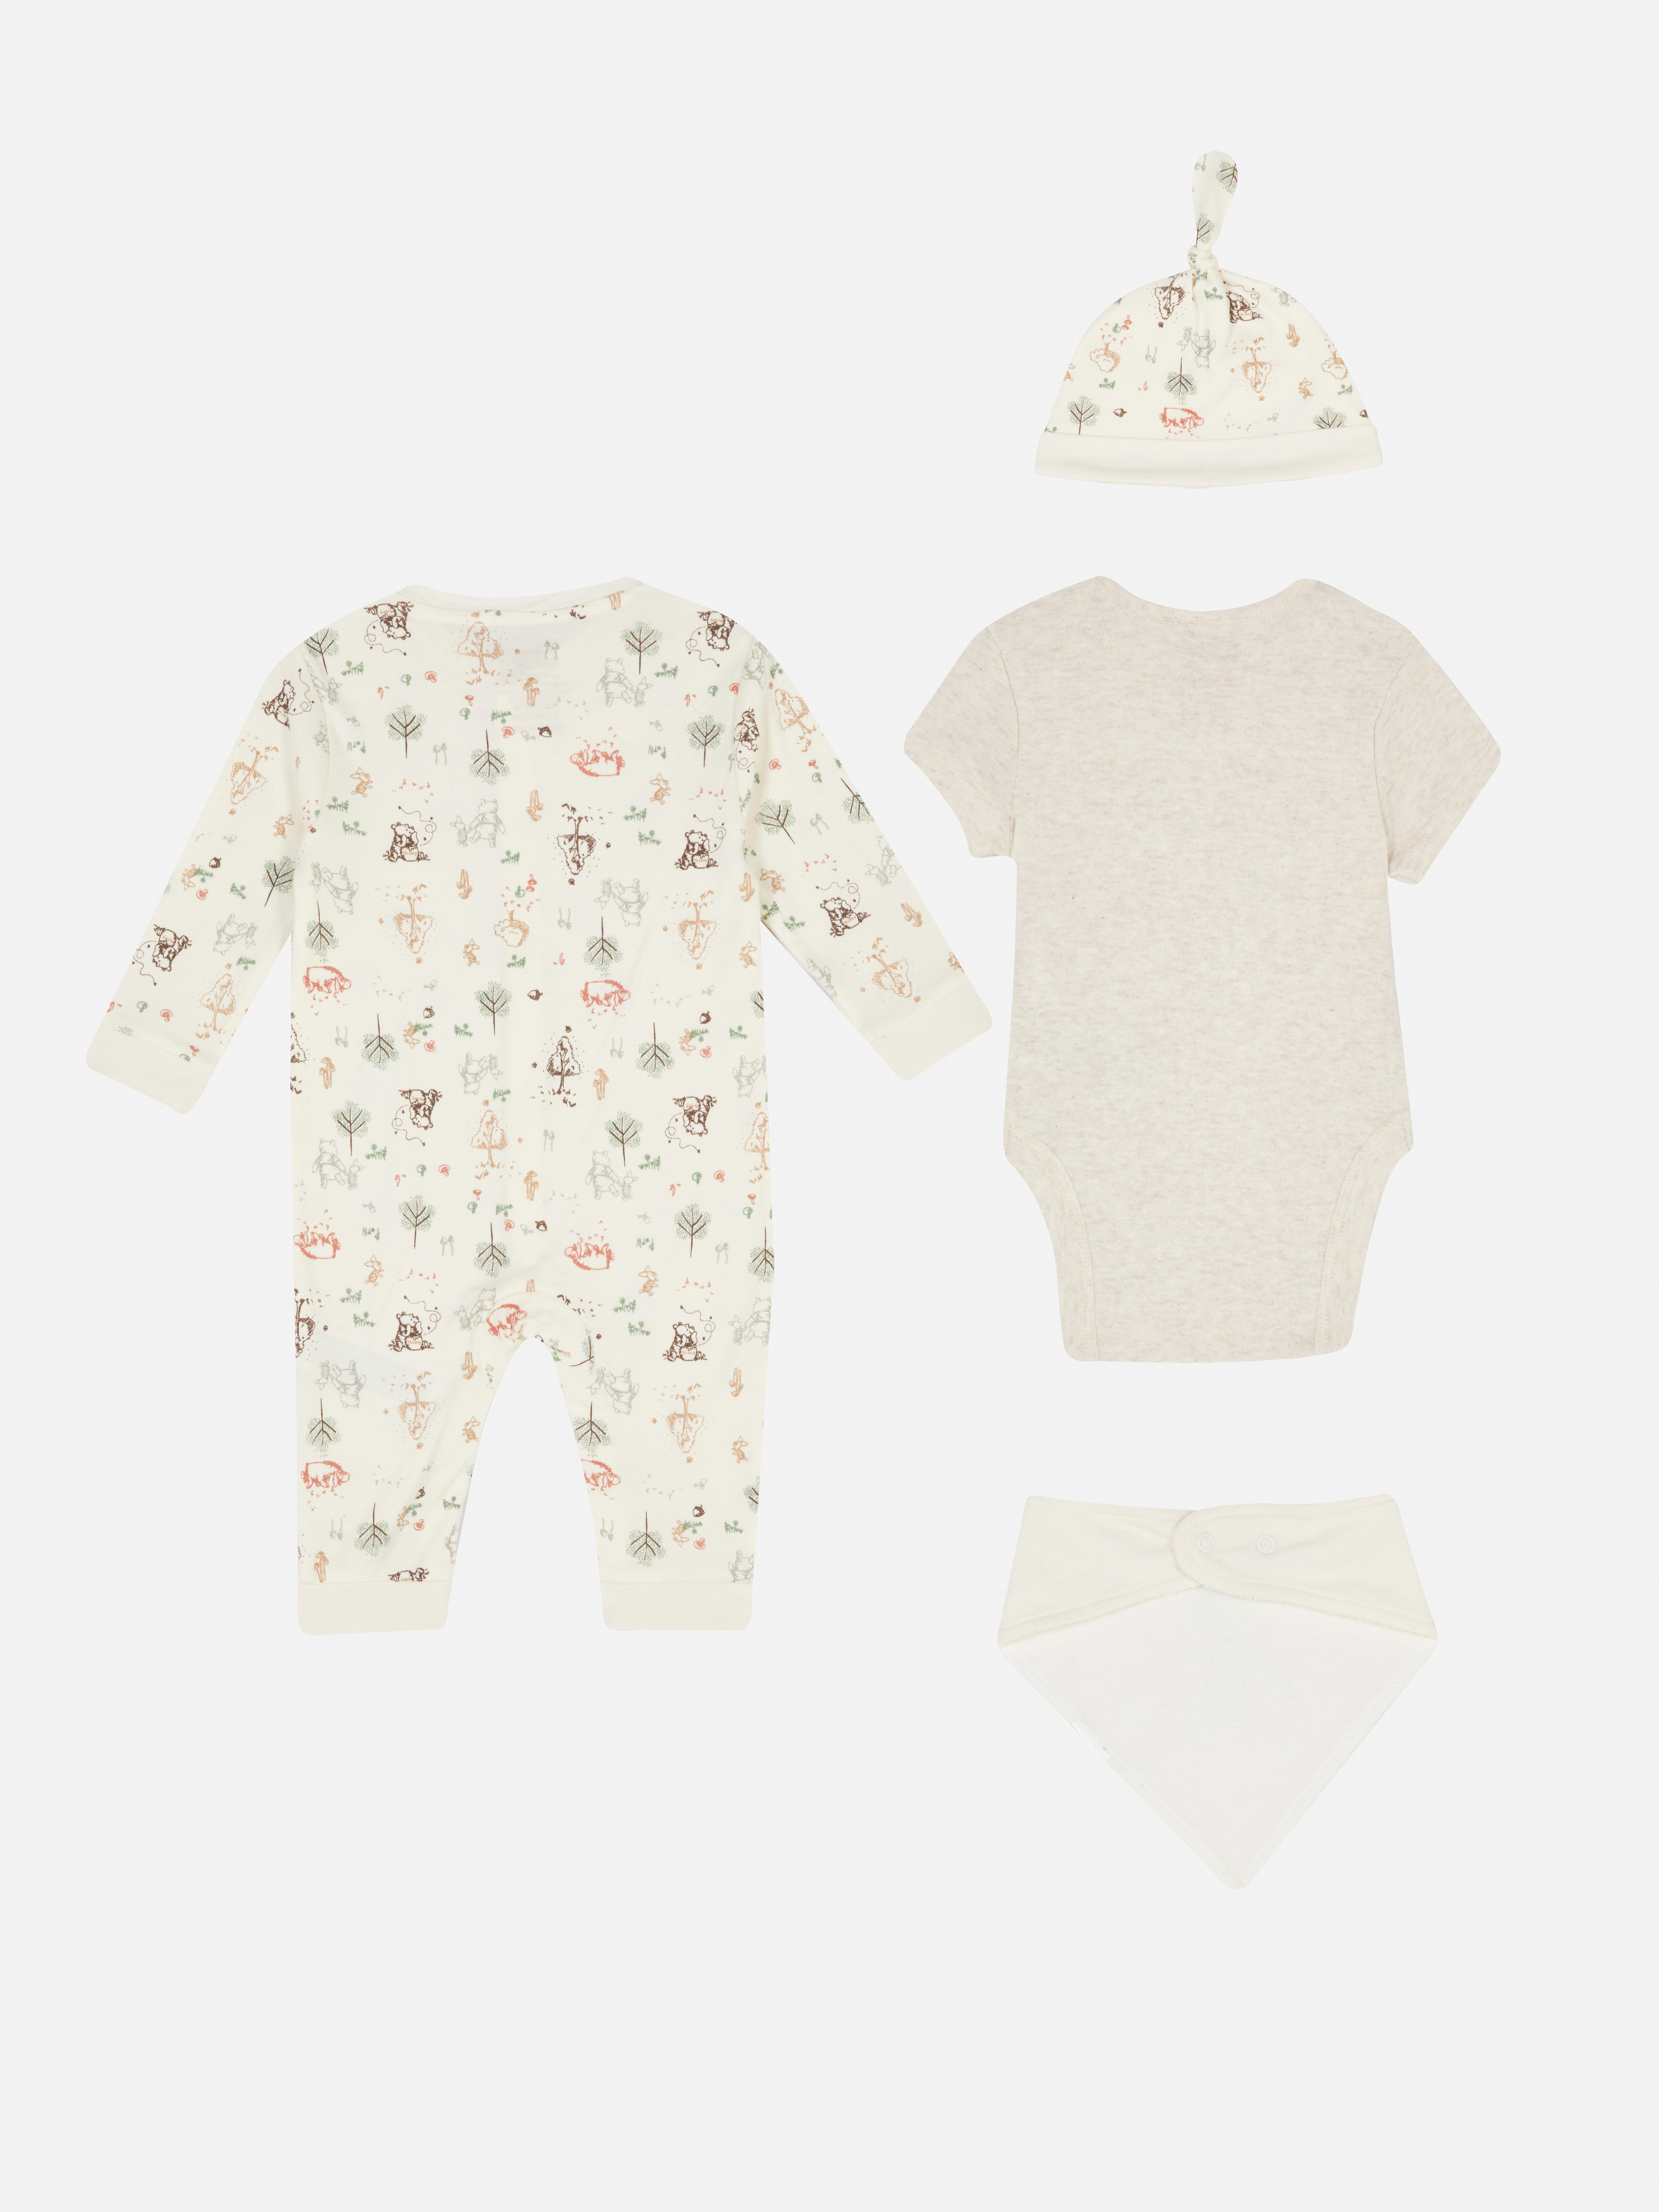 Disney's Winnie the Pooh Starter Clothes and Accessory Set